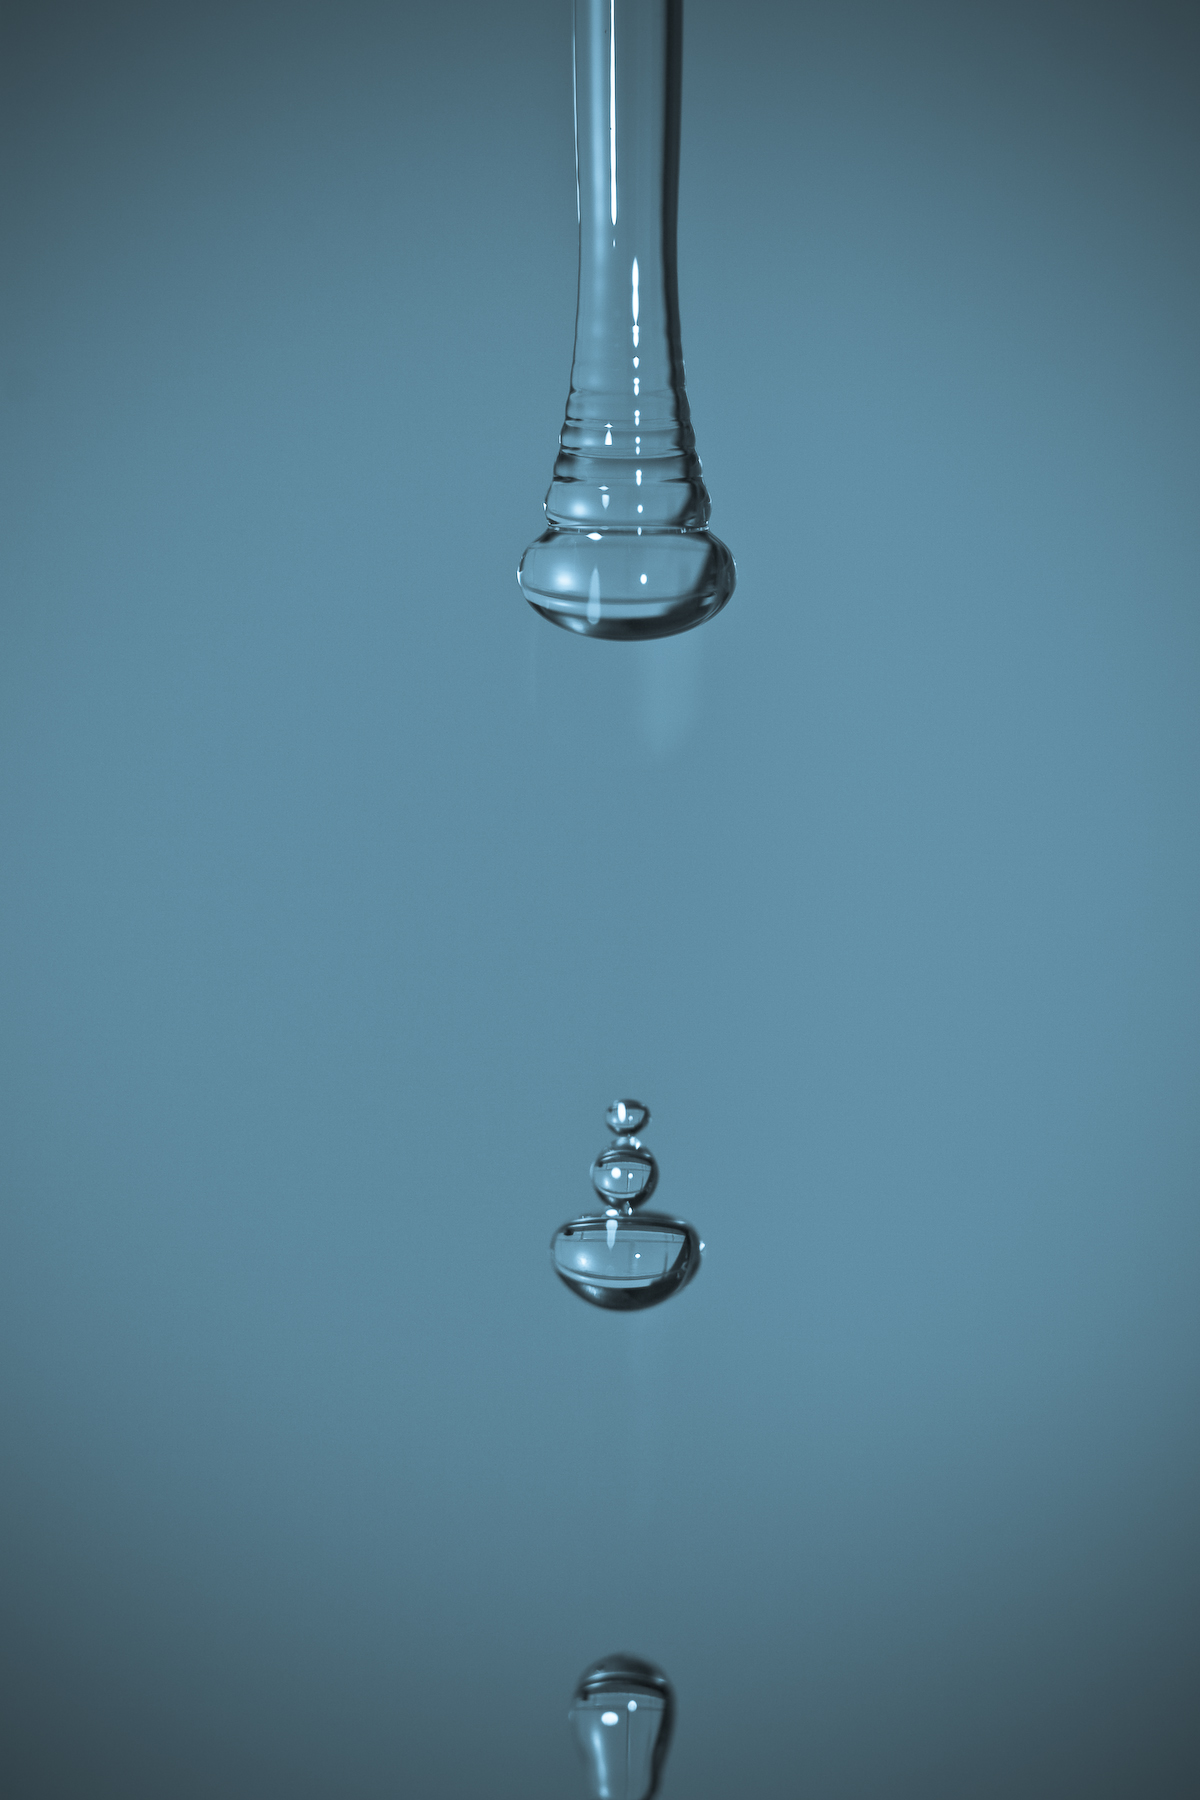 A drop of water photo